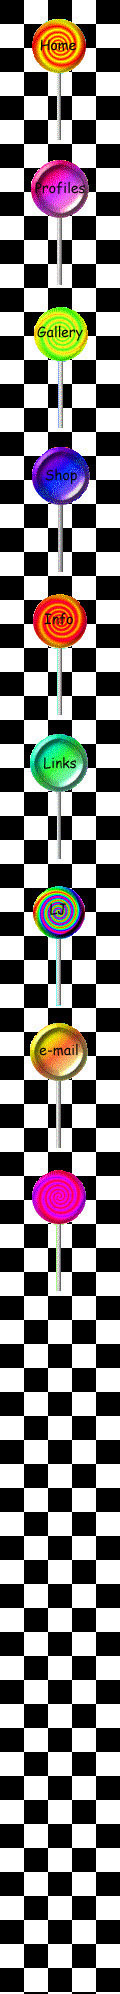 lollypops on checkerboard background